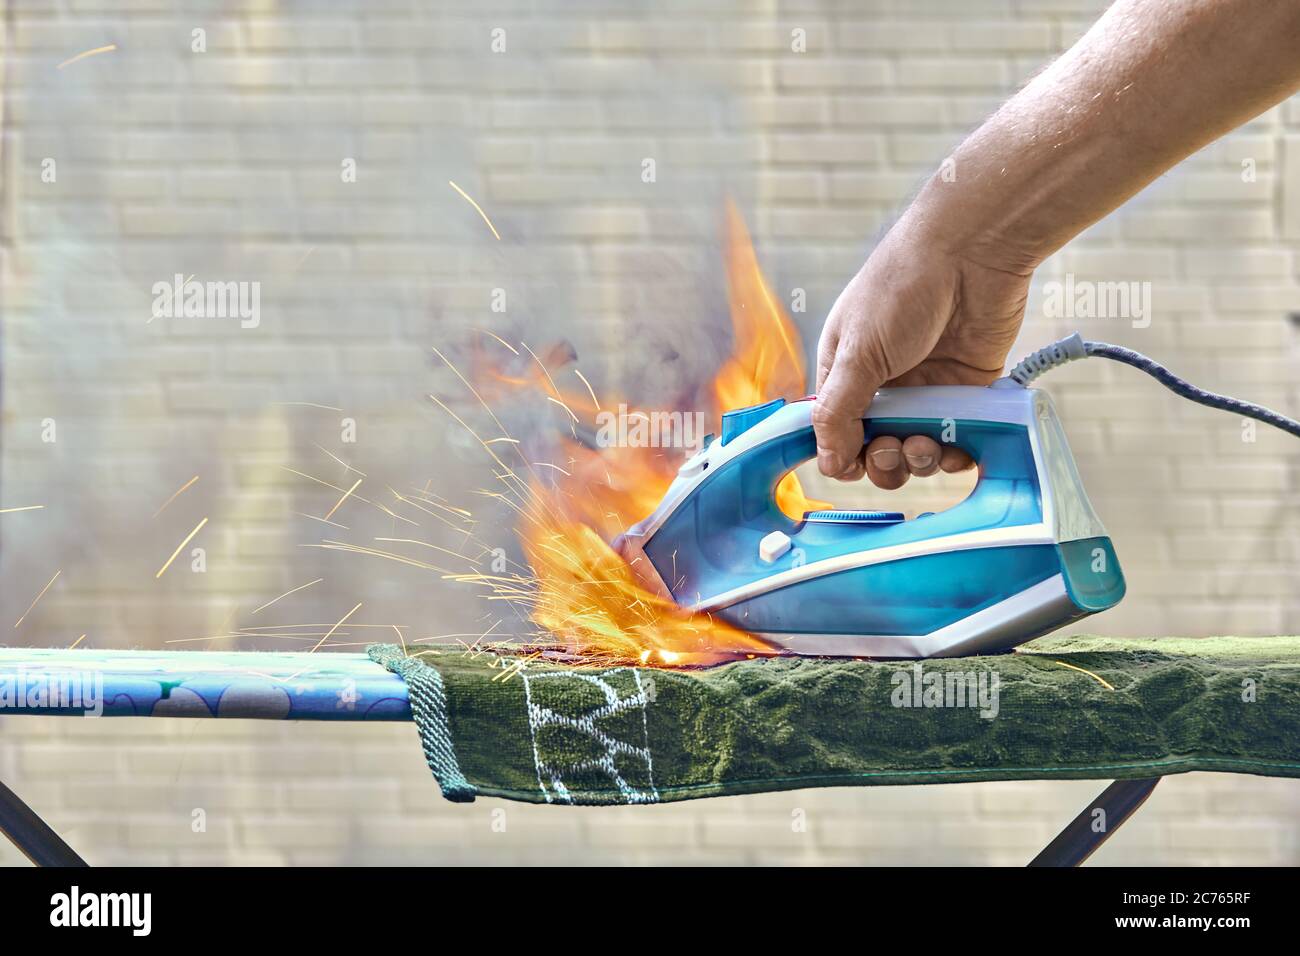 Electrical iron for ironing clothes caused a house fire. The appliance that is forgotten to disconnect from the power is burned. A human hand  is tryi Stock Photo